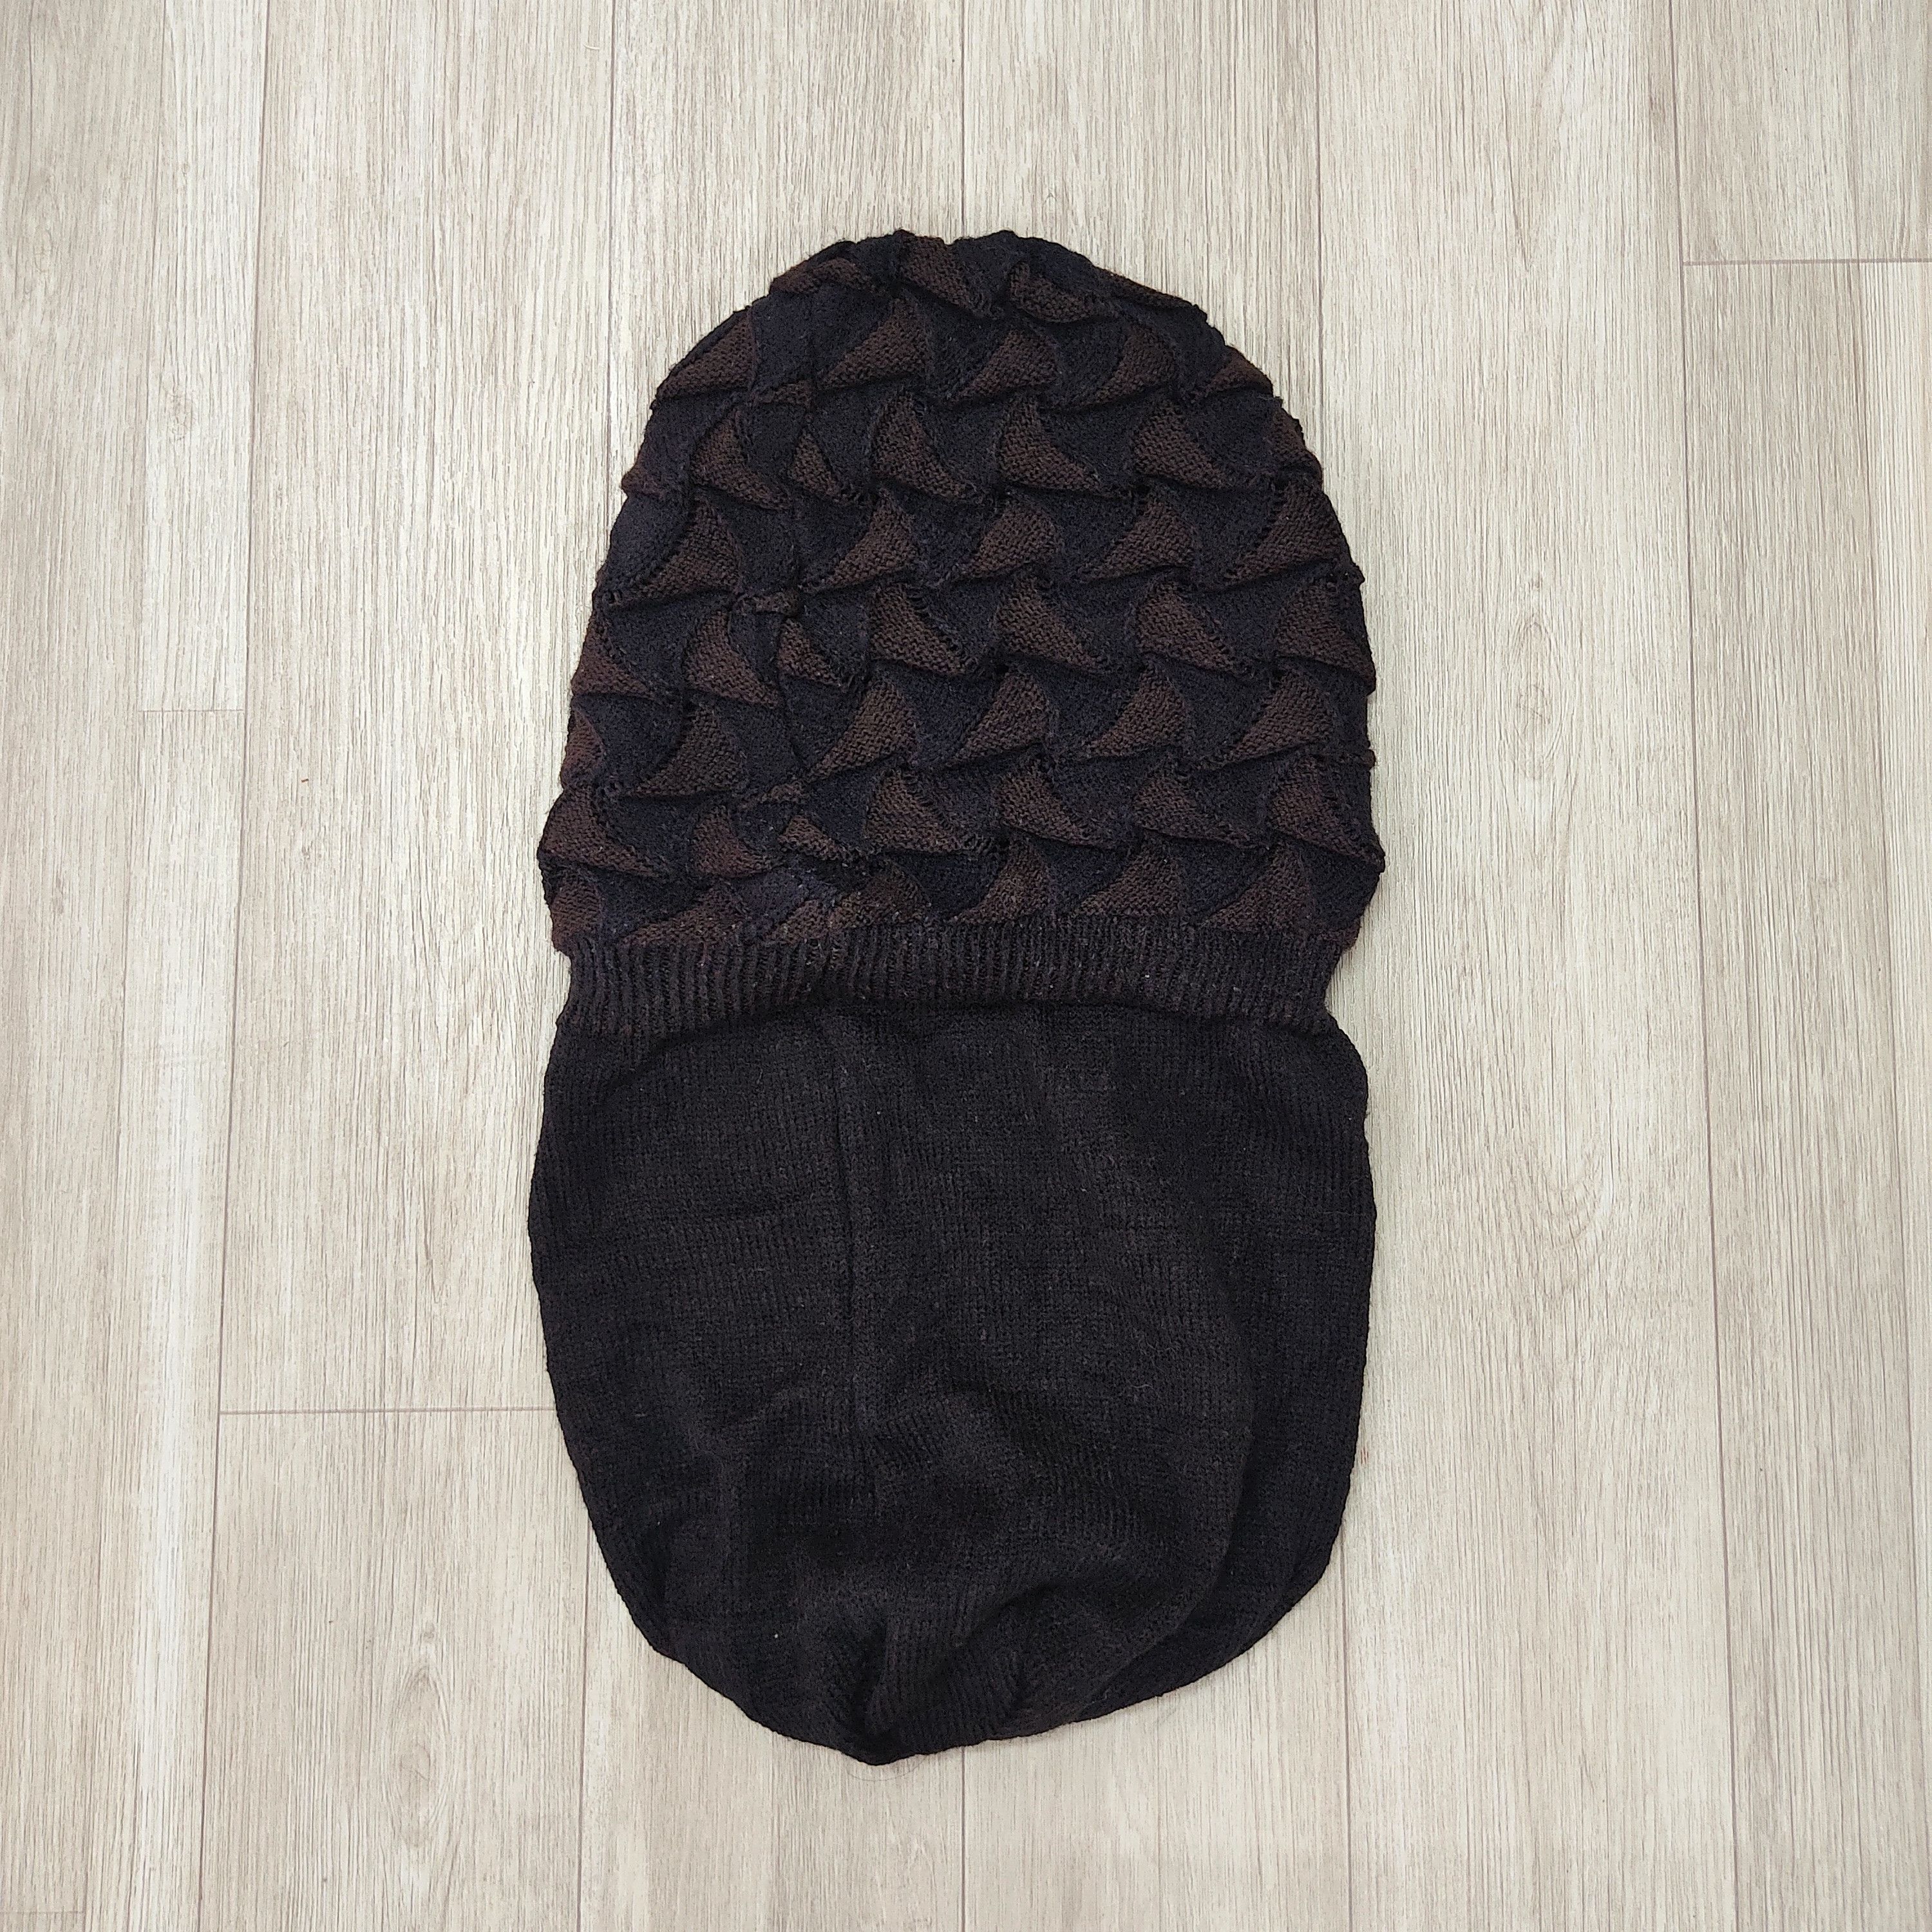 Rare - Reversible Knitted Chrome Hearts Inspired Pattern Beanie - 10